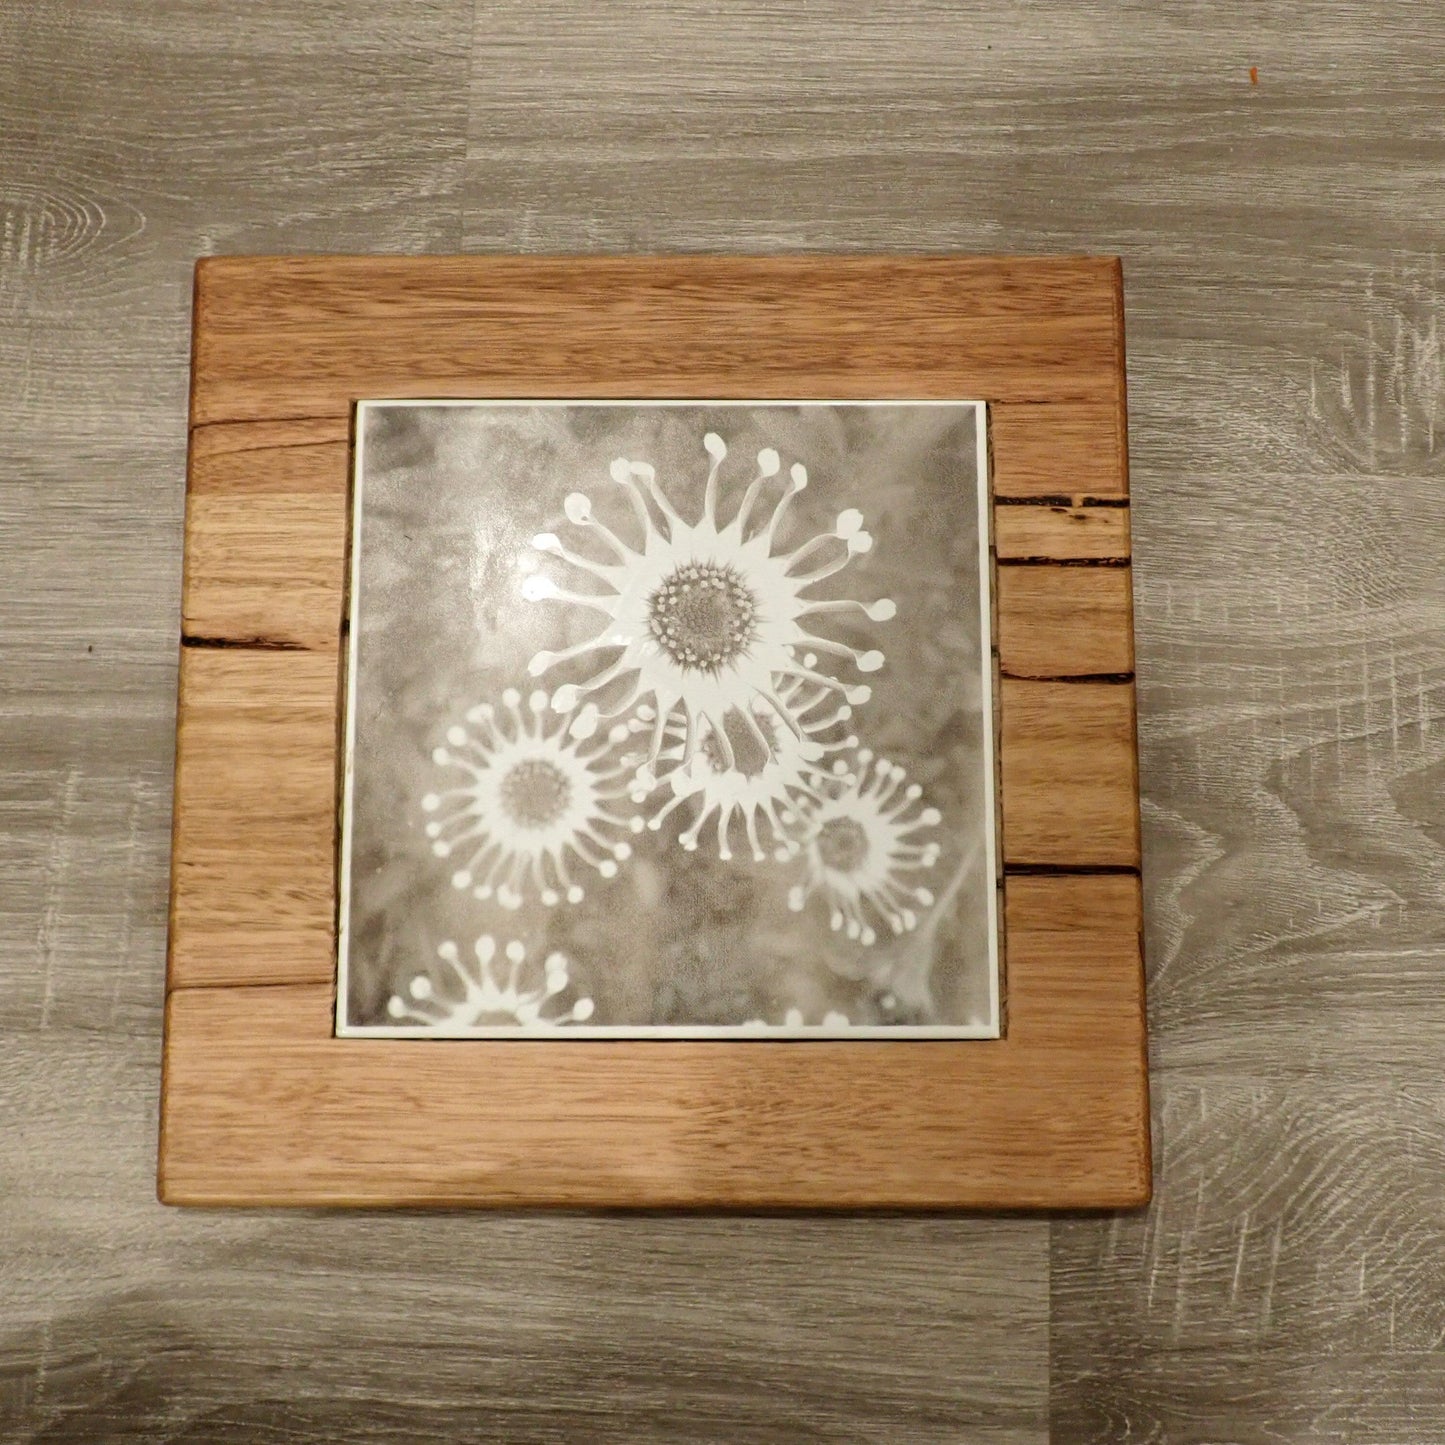 Tile and Timber Heat Pad - African Daisy 'Spider White' On Tasmanian Oak - Burning Man Designs